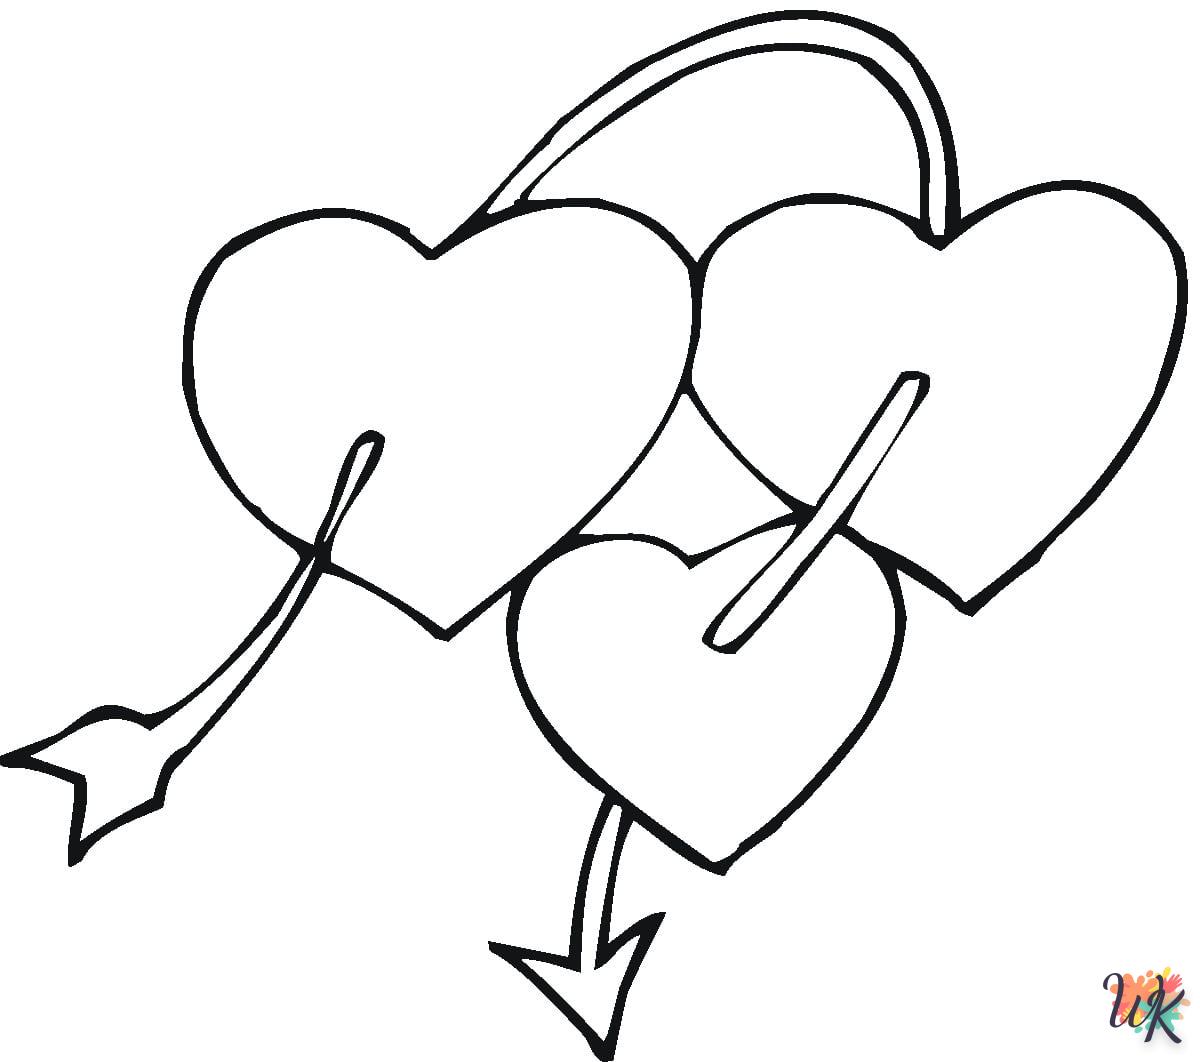 Magic heart coloring page to do online 1